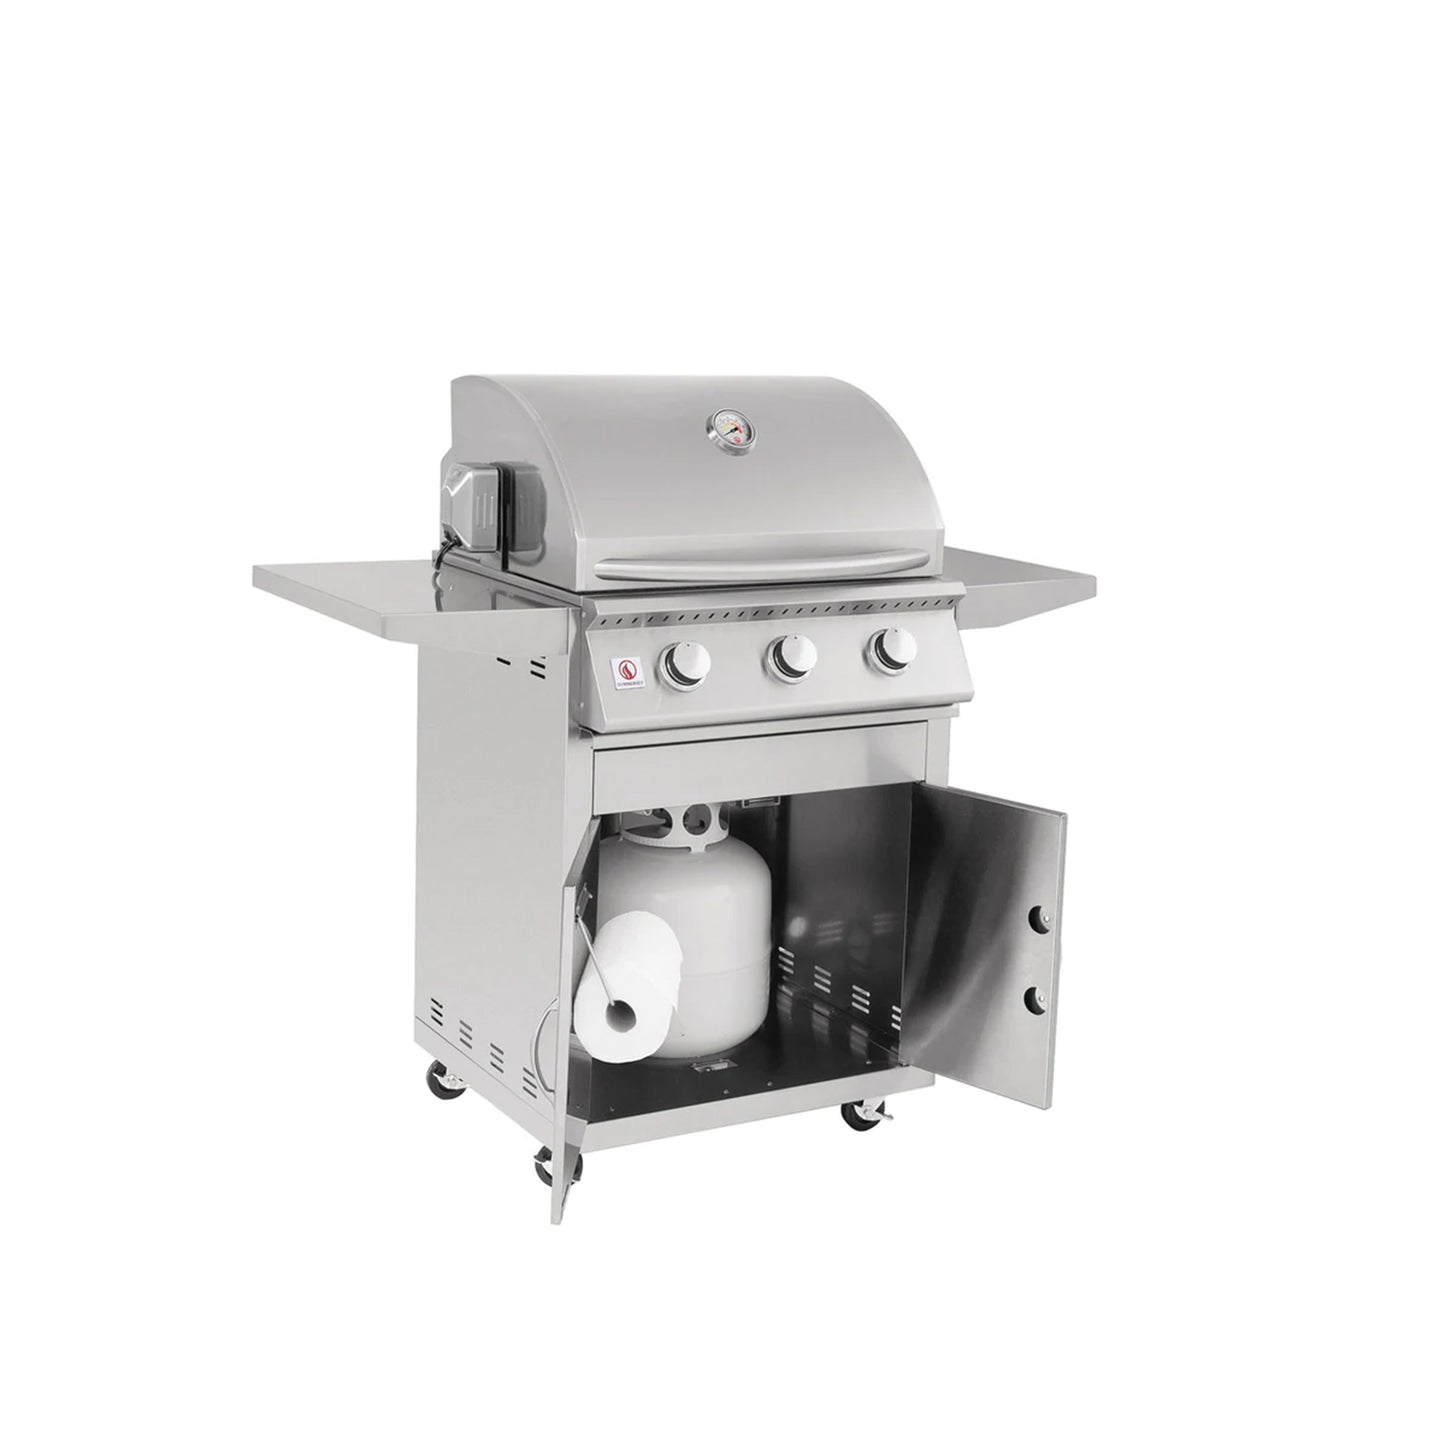 Summerset Sizzler 26-Inch Freestanding Grill